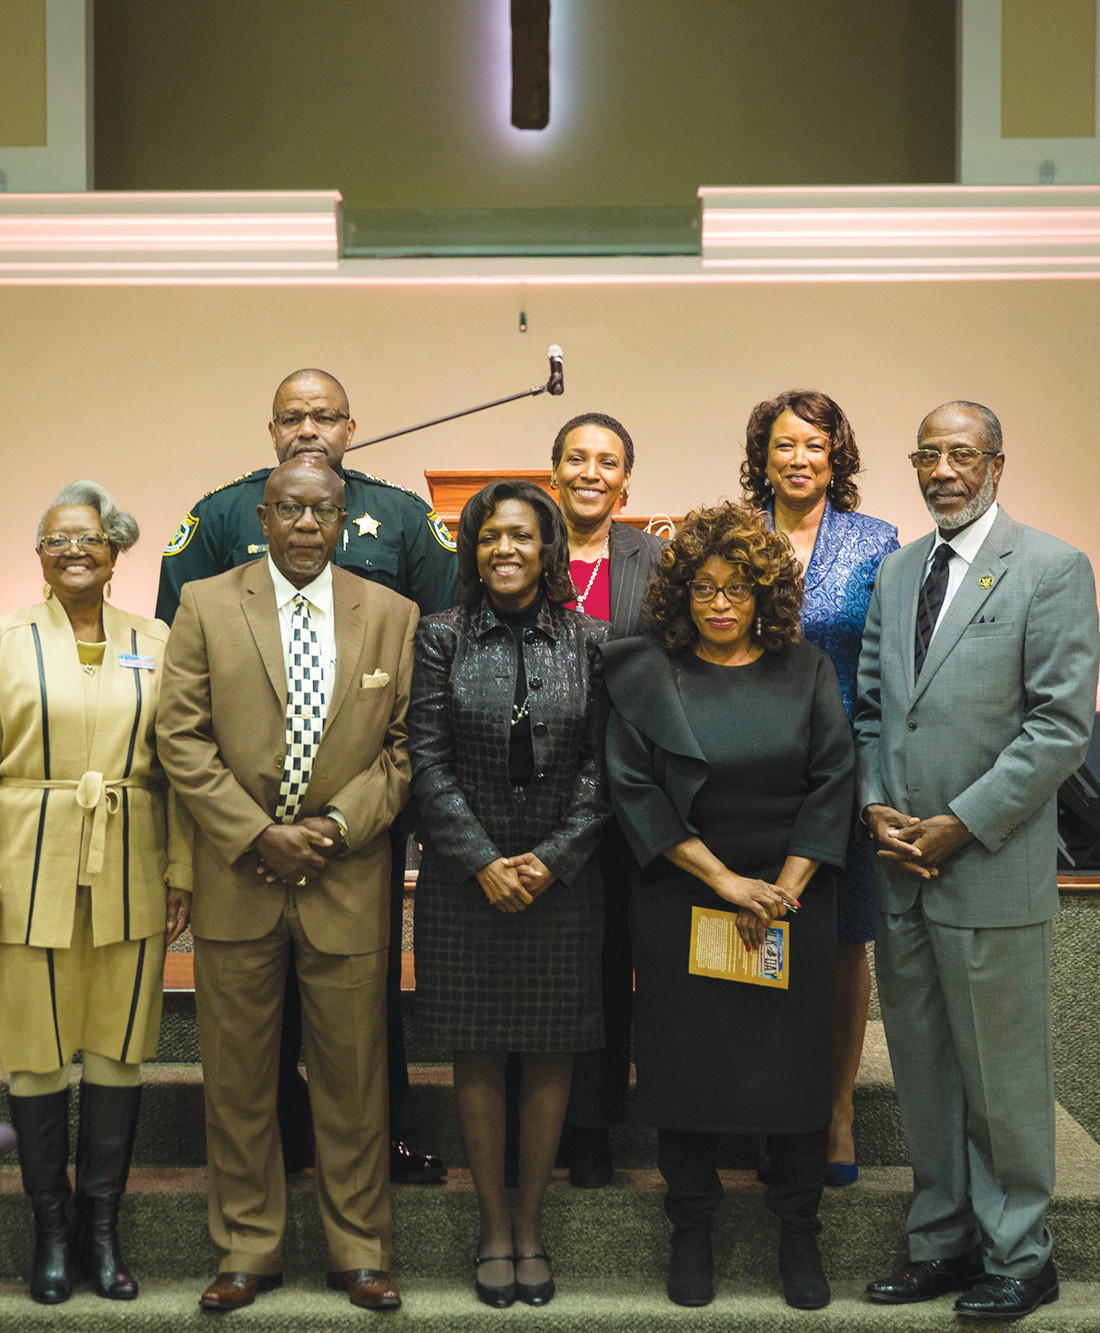 Former and current African American political candidates from Clay County posed for a photo after the annual MLK Breakfast honoree Chris Chambless, Clay County Supervisor of Elections, read their names. The group included former U.S. Rep Corrine Brown, a convicted felon who is under orders to begin her five year prison sentence later this month.